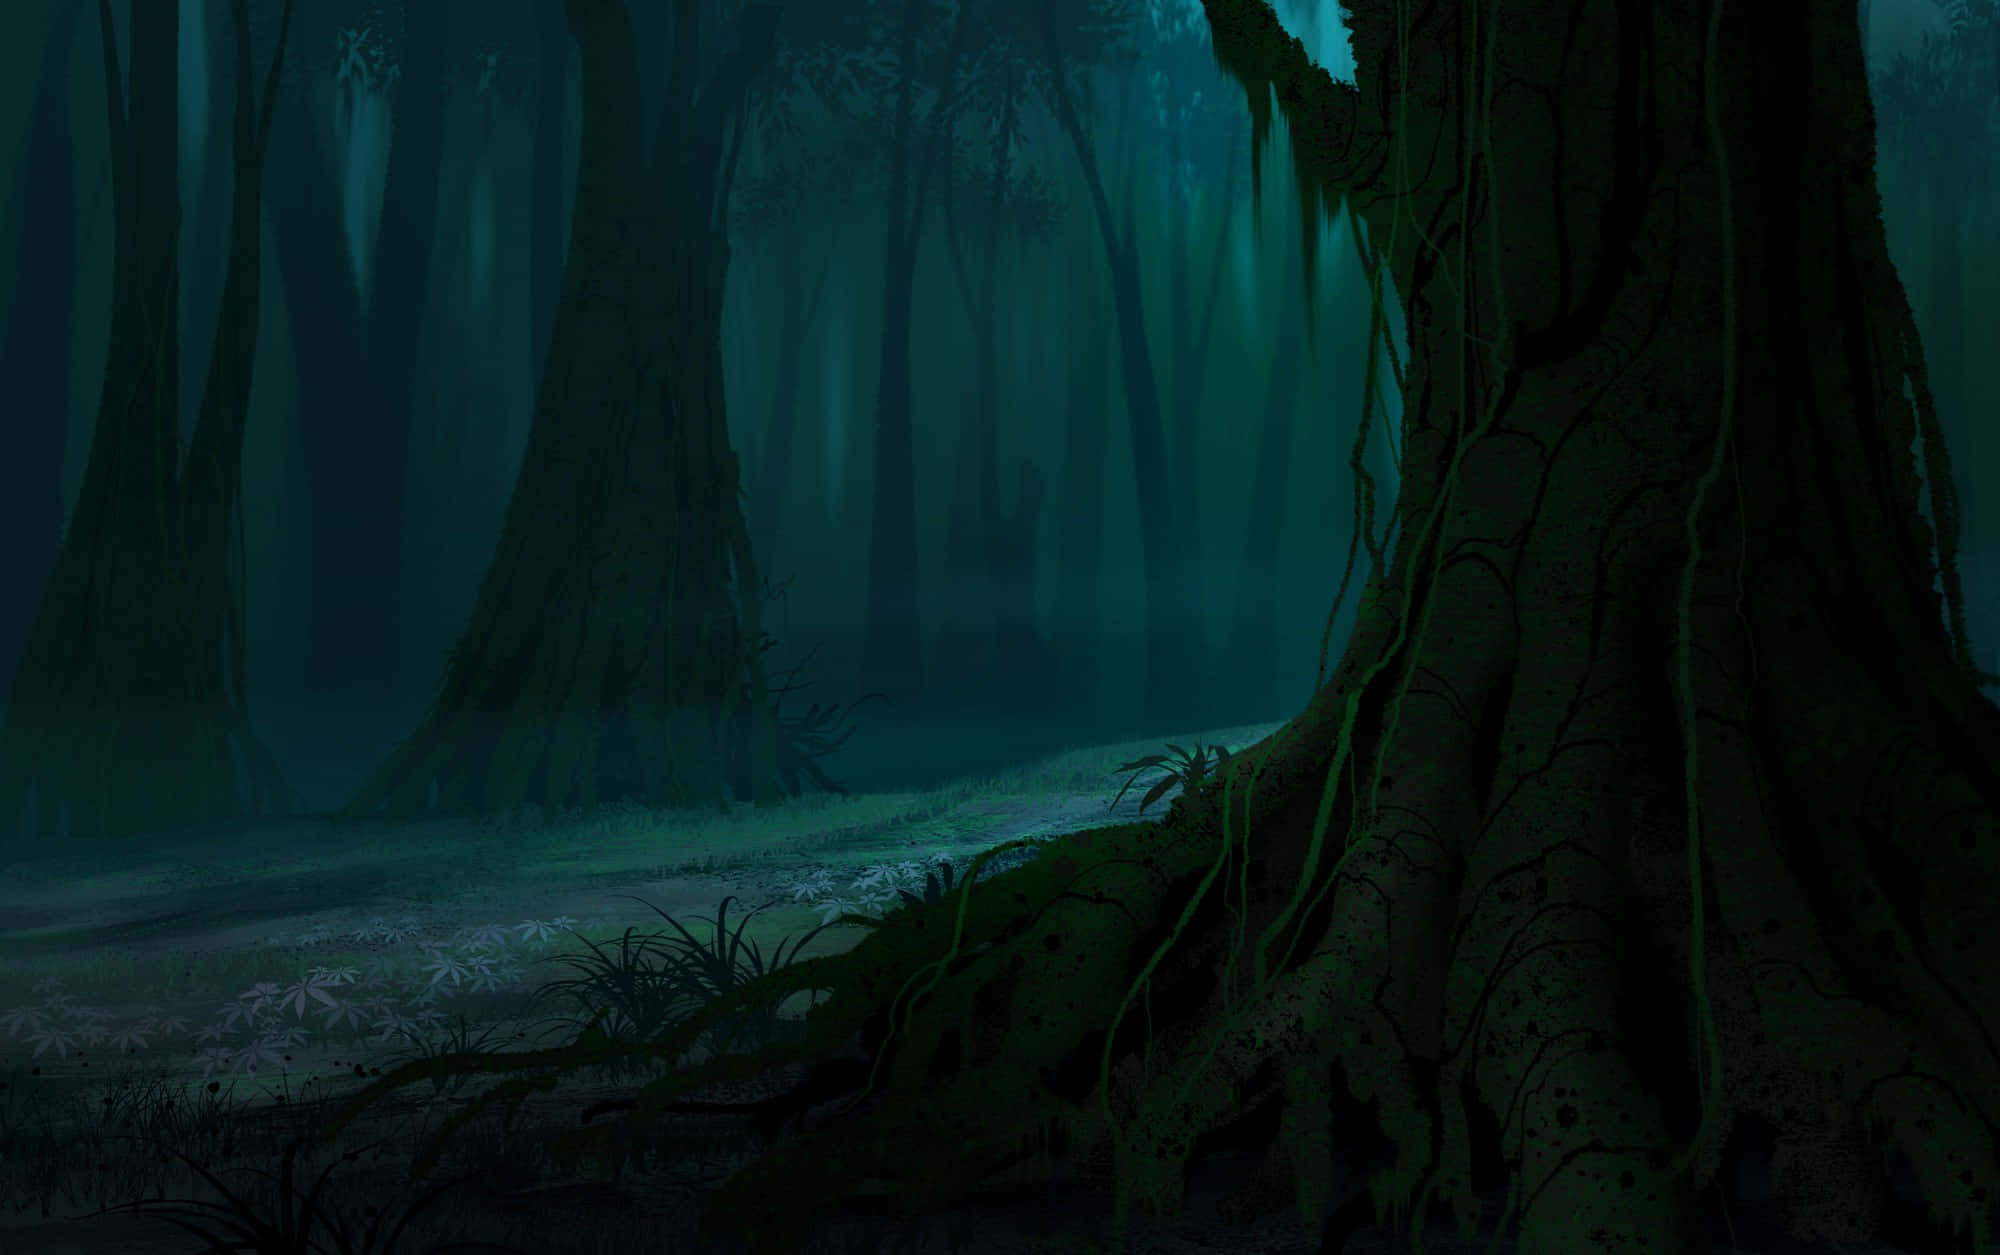 Samurai Jack standing tall in a mysterious forest